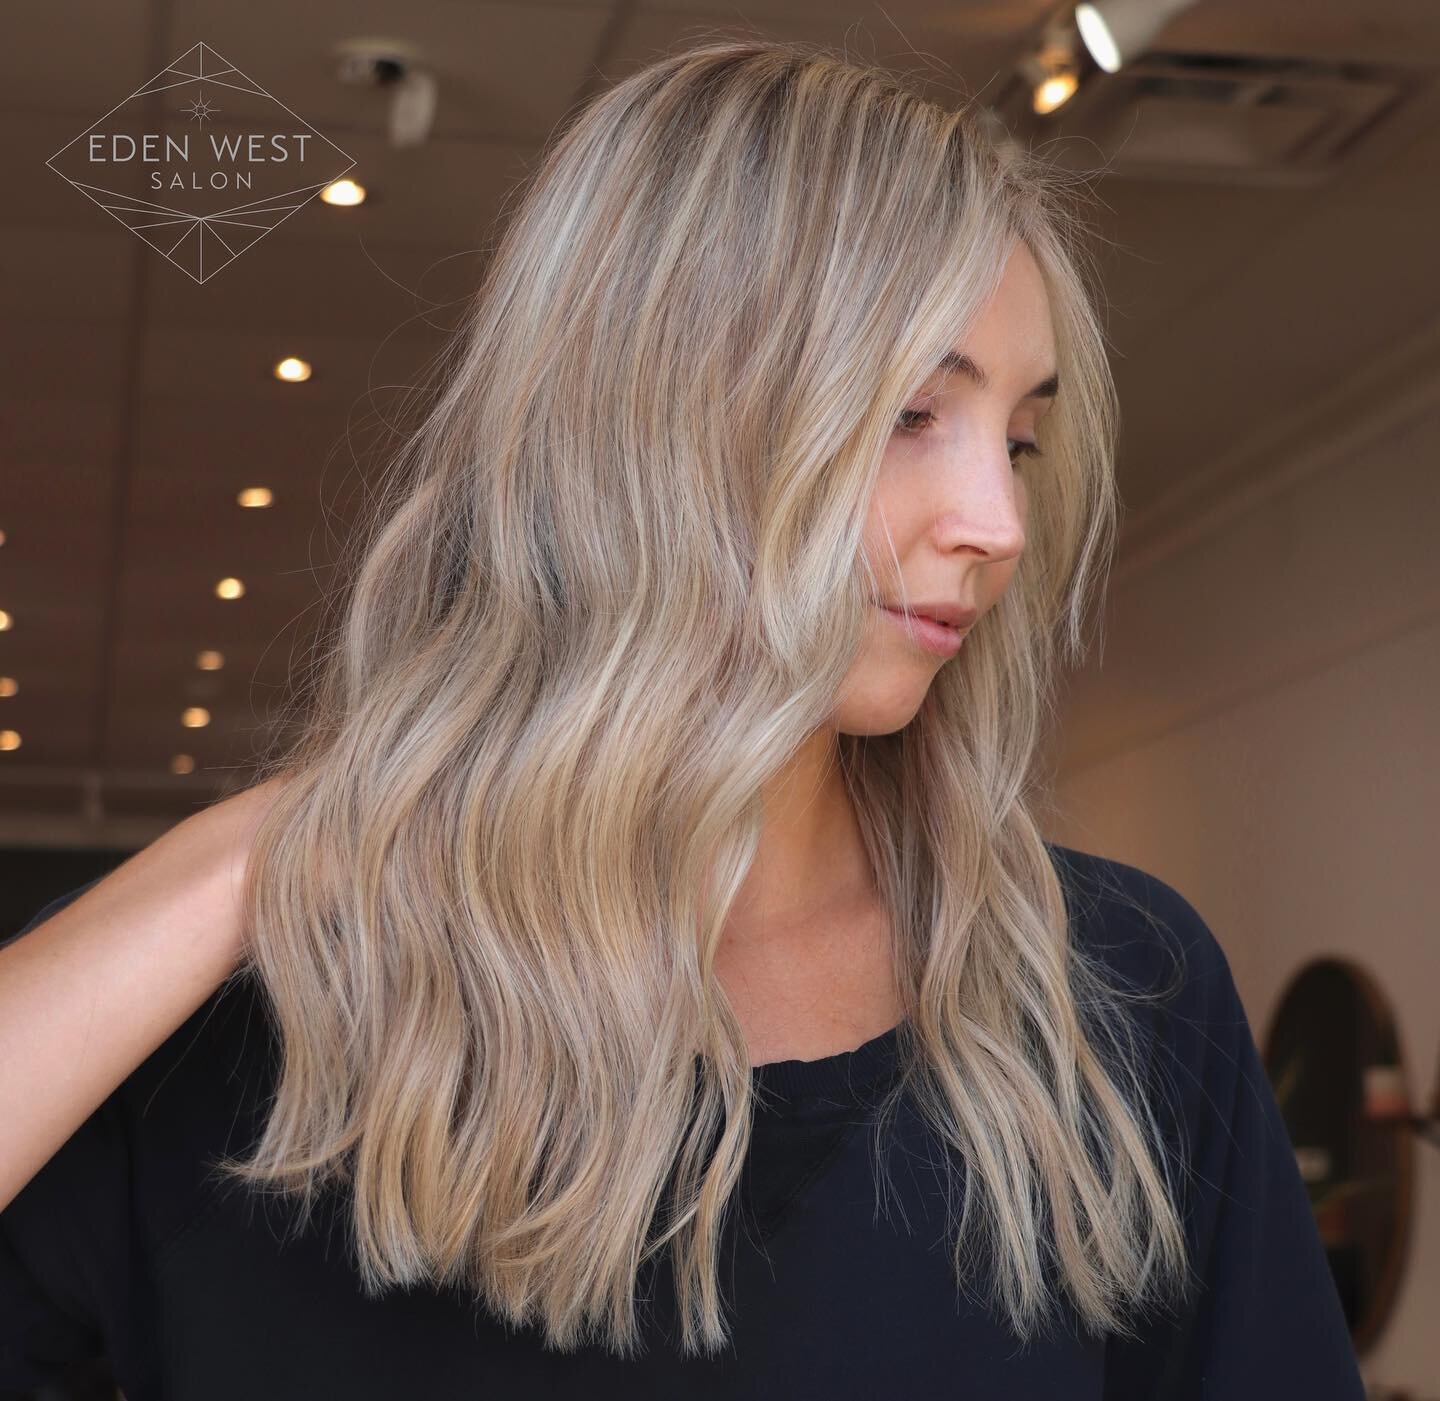 Spring prep has officially begun, y&rsquo;all! 🌷🌸🌼💐🌺🌻

Schedule those appointments before the books fill up @ the link in our bio! 

#edenwestsalon #downtownchshairsalon #bookinglinkinbio #booknow #hairinspo #springhair #blondehair #blondie #sp